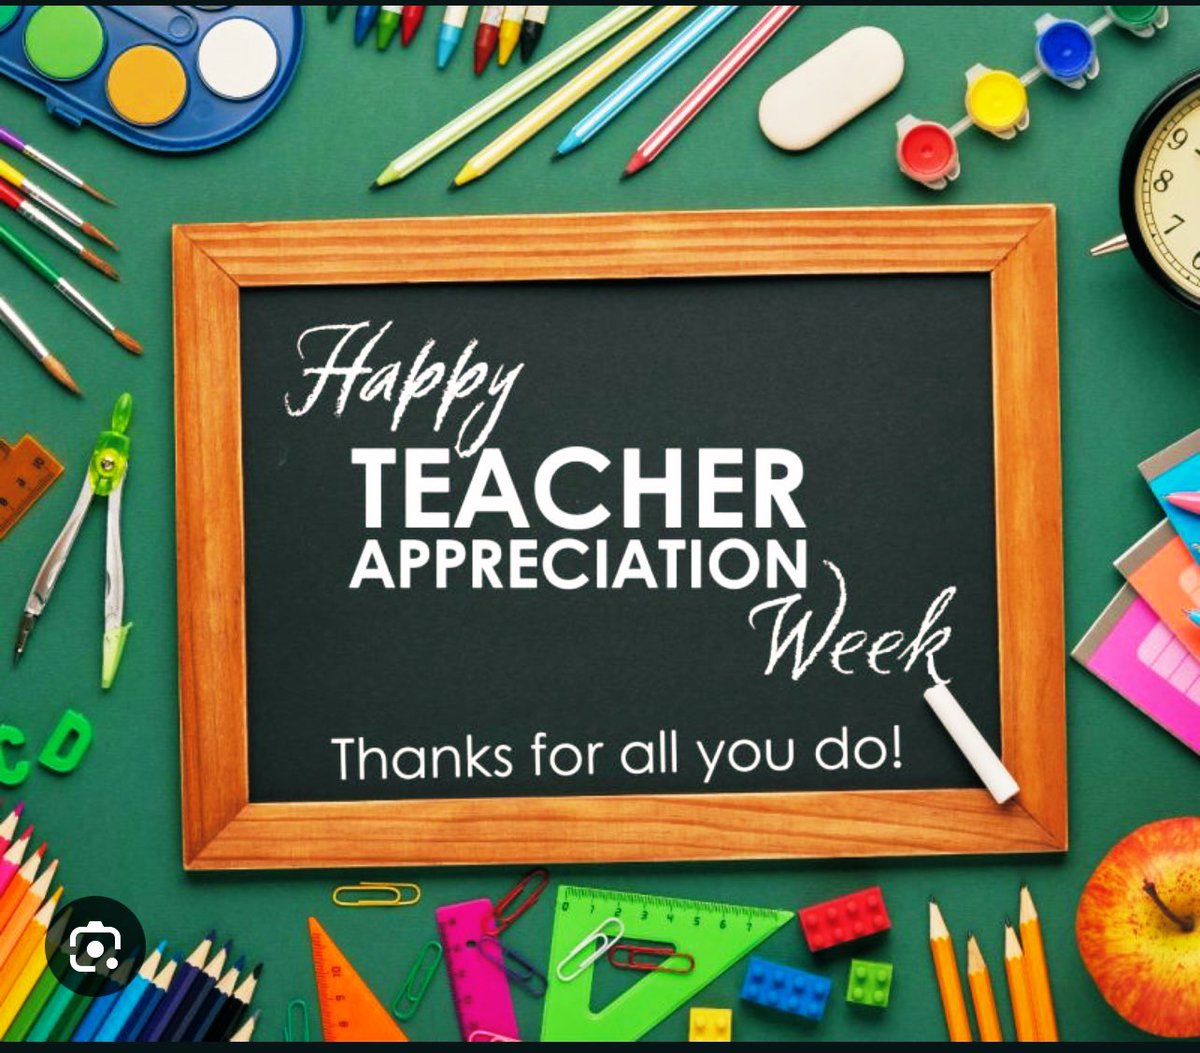 Happy Teacher Appreciation Week to our incredible teachers in Cougarland! Thank you for pouring into our students every day and striving for excellence! The work of a teacher is truly HEART work! Thank you for all that you do! 💙🍎💛 @MrWStewart